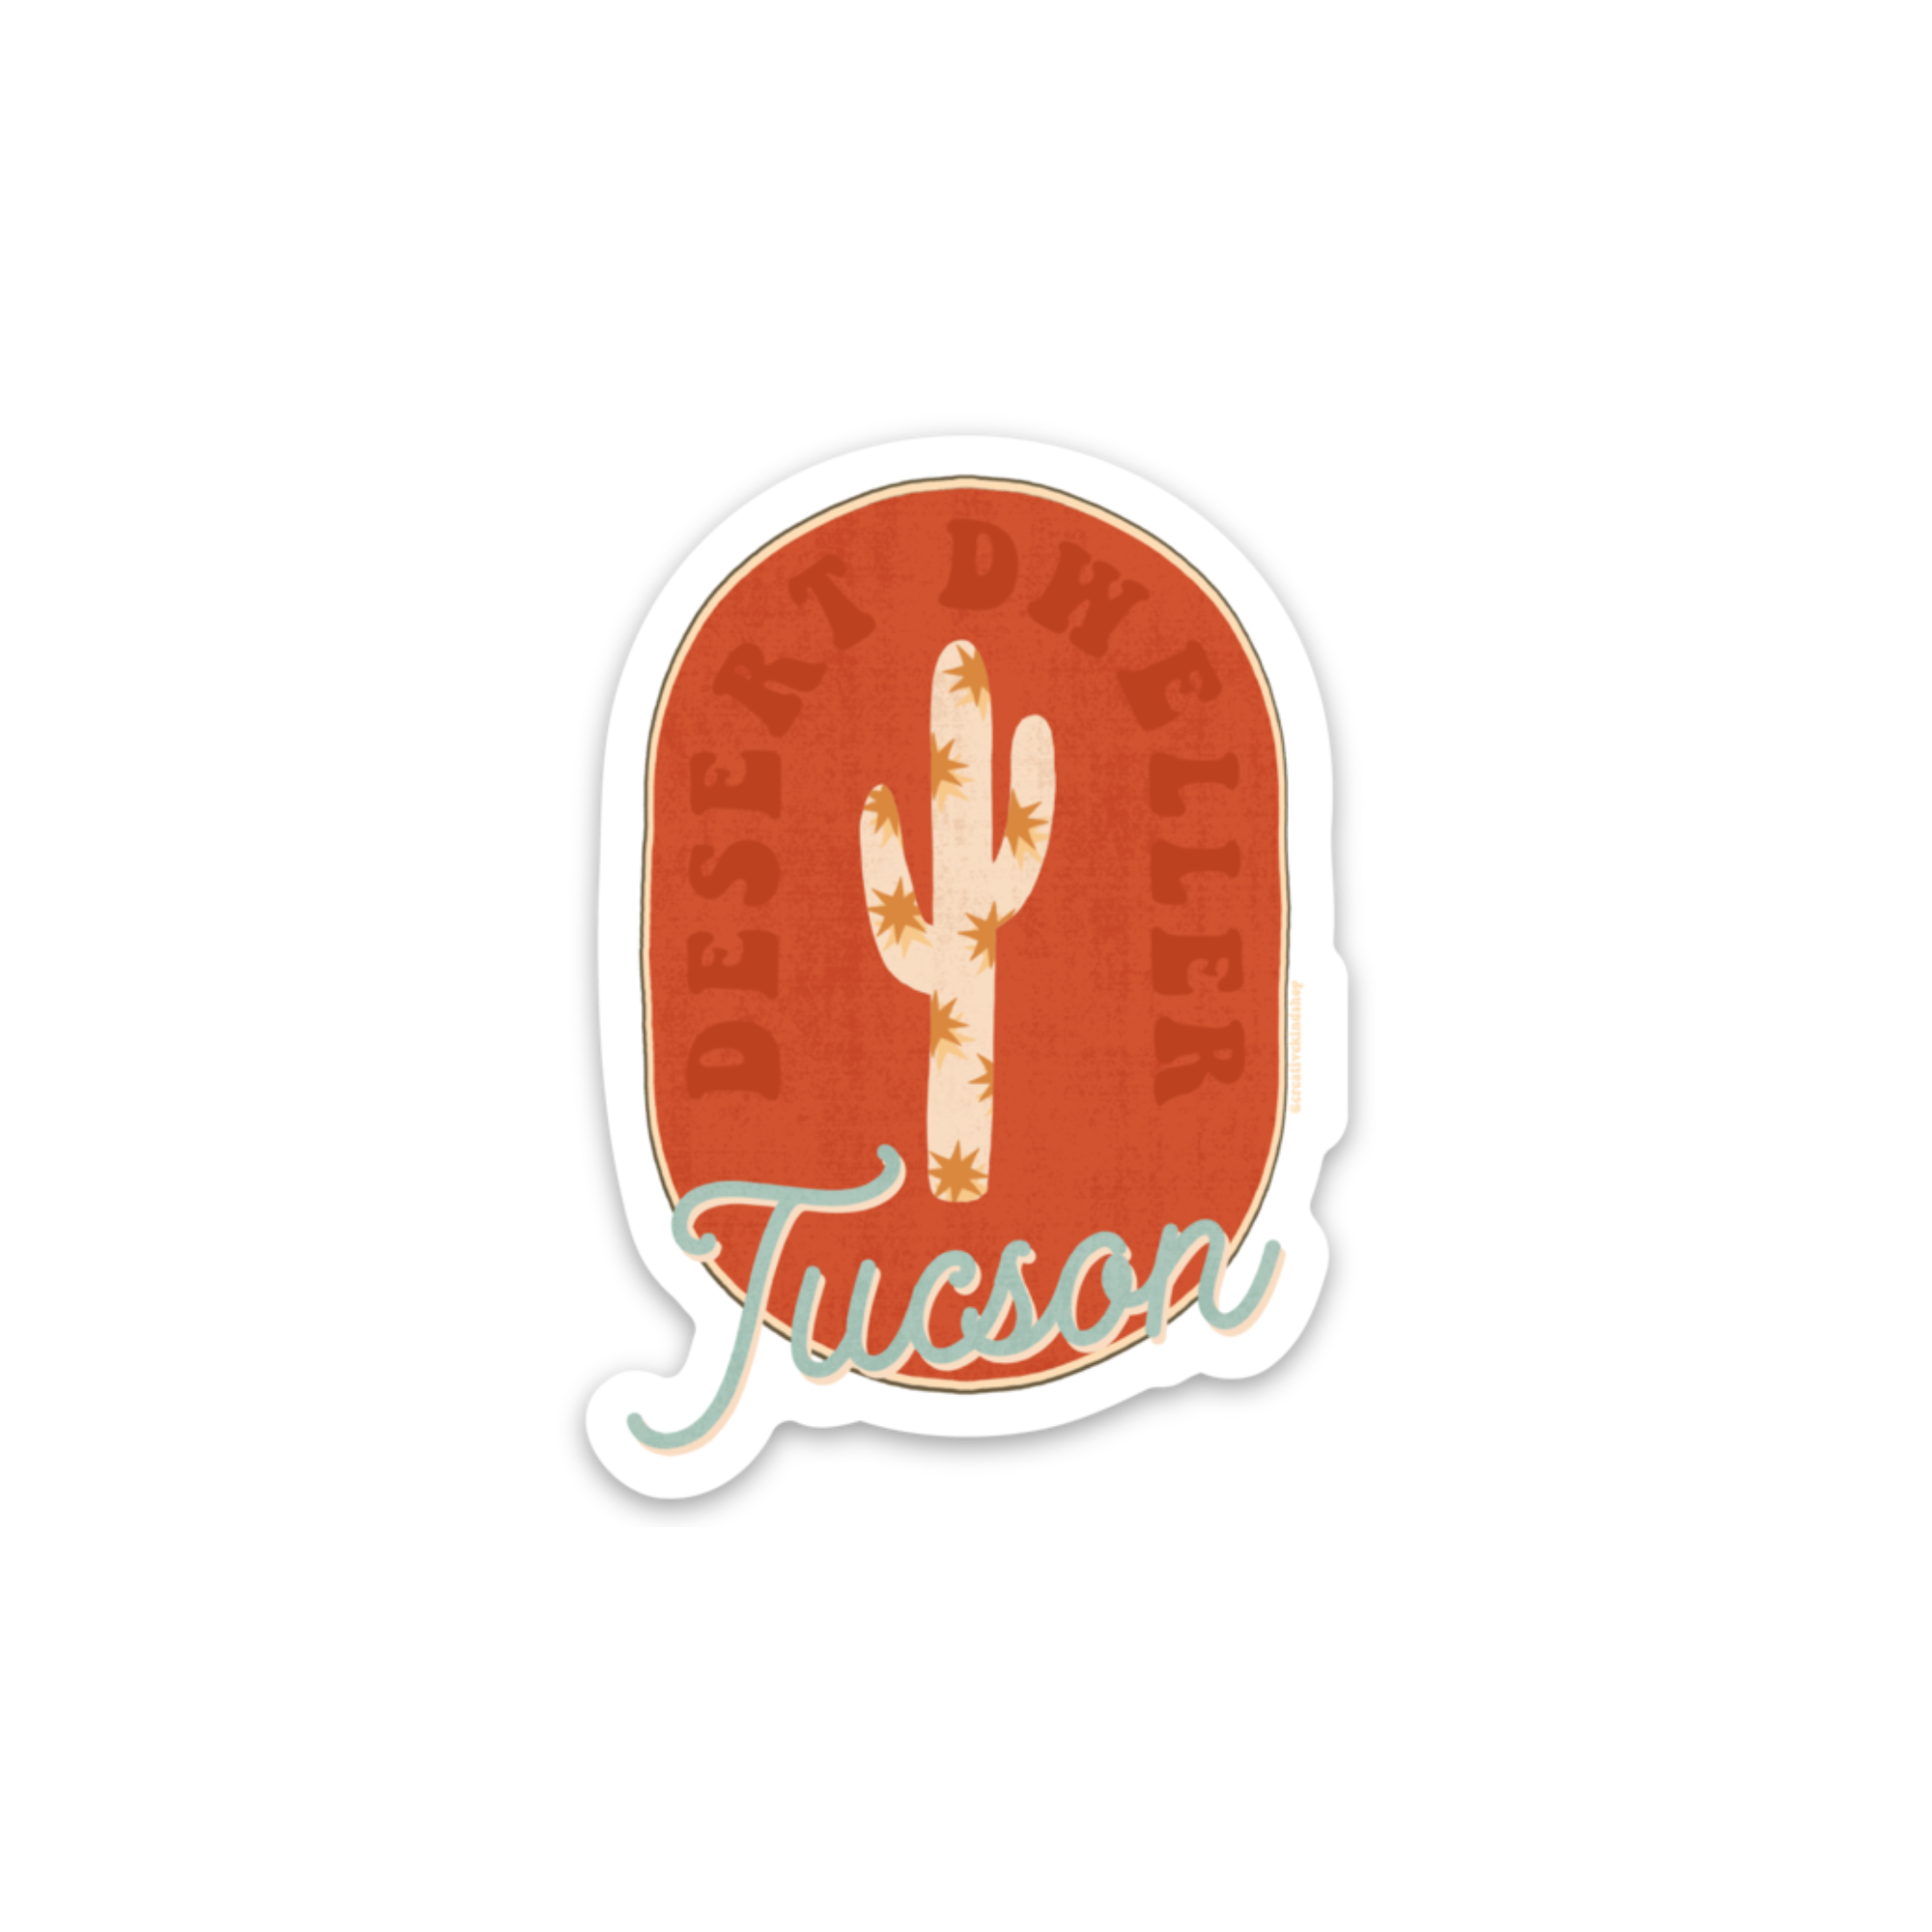 Oval sticker with red background and tan cactus with the words "desert dweller tucson"